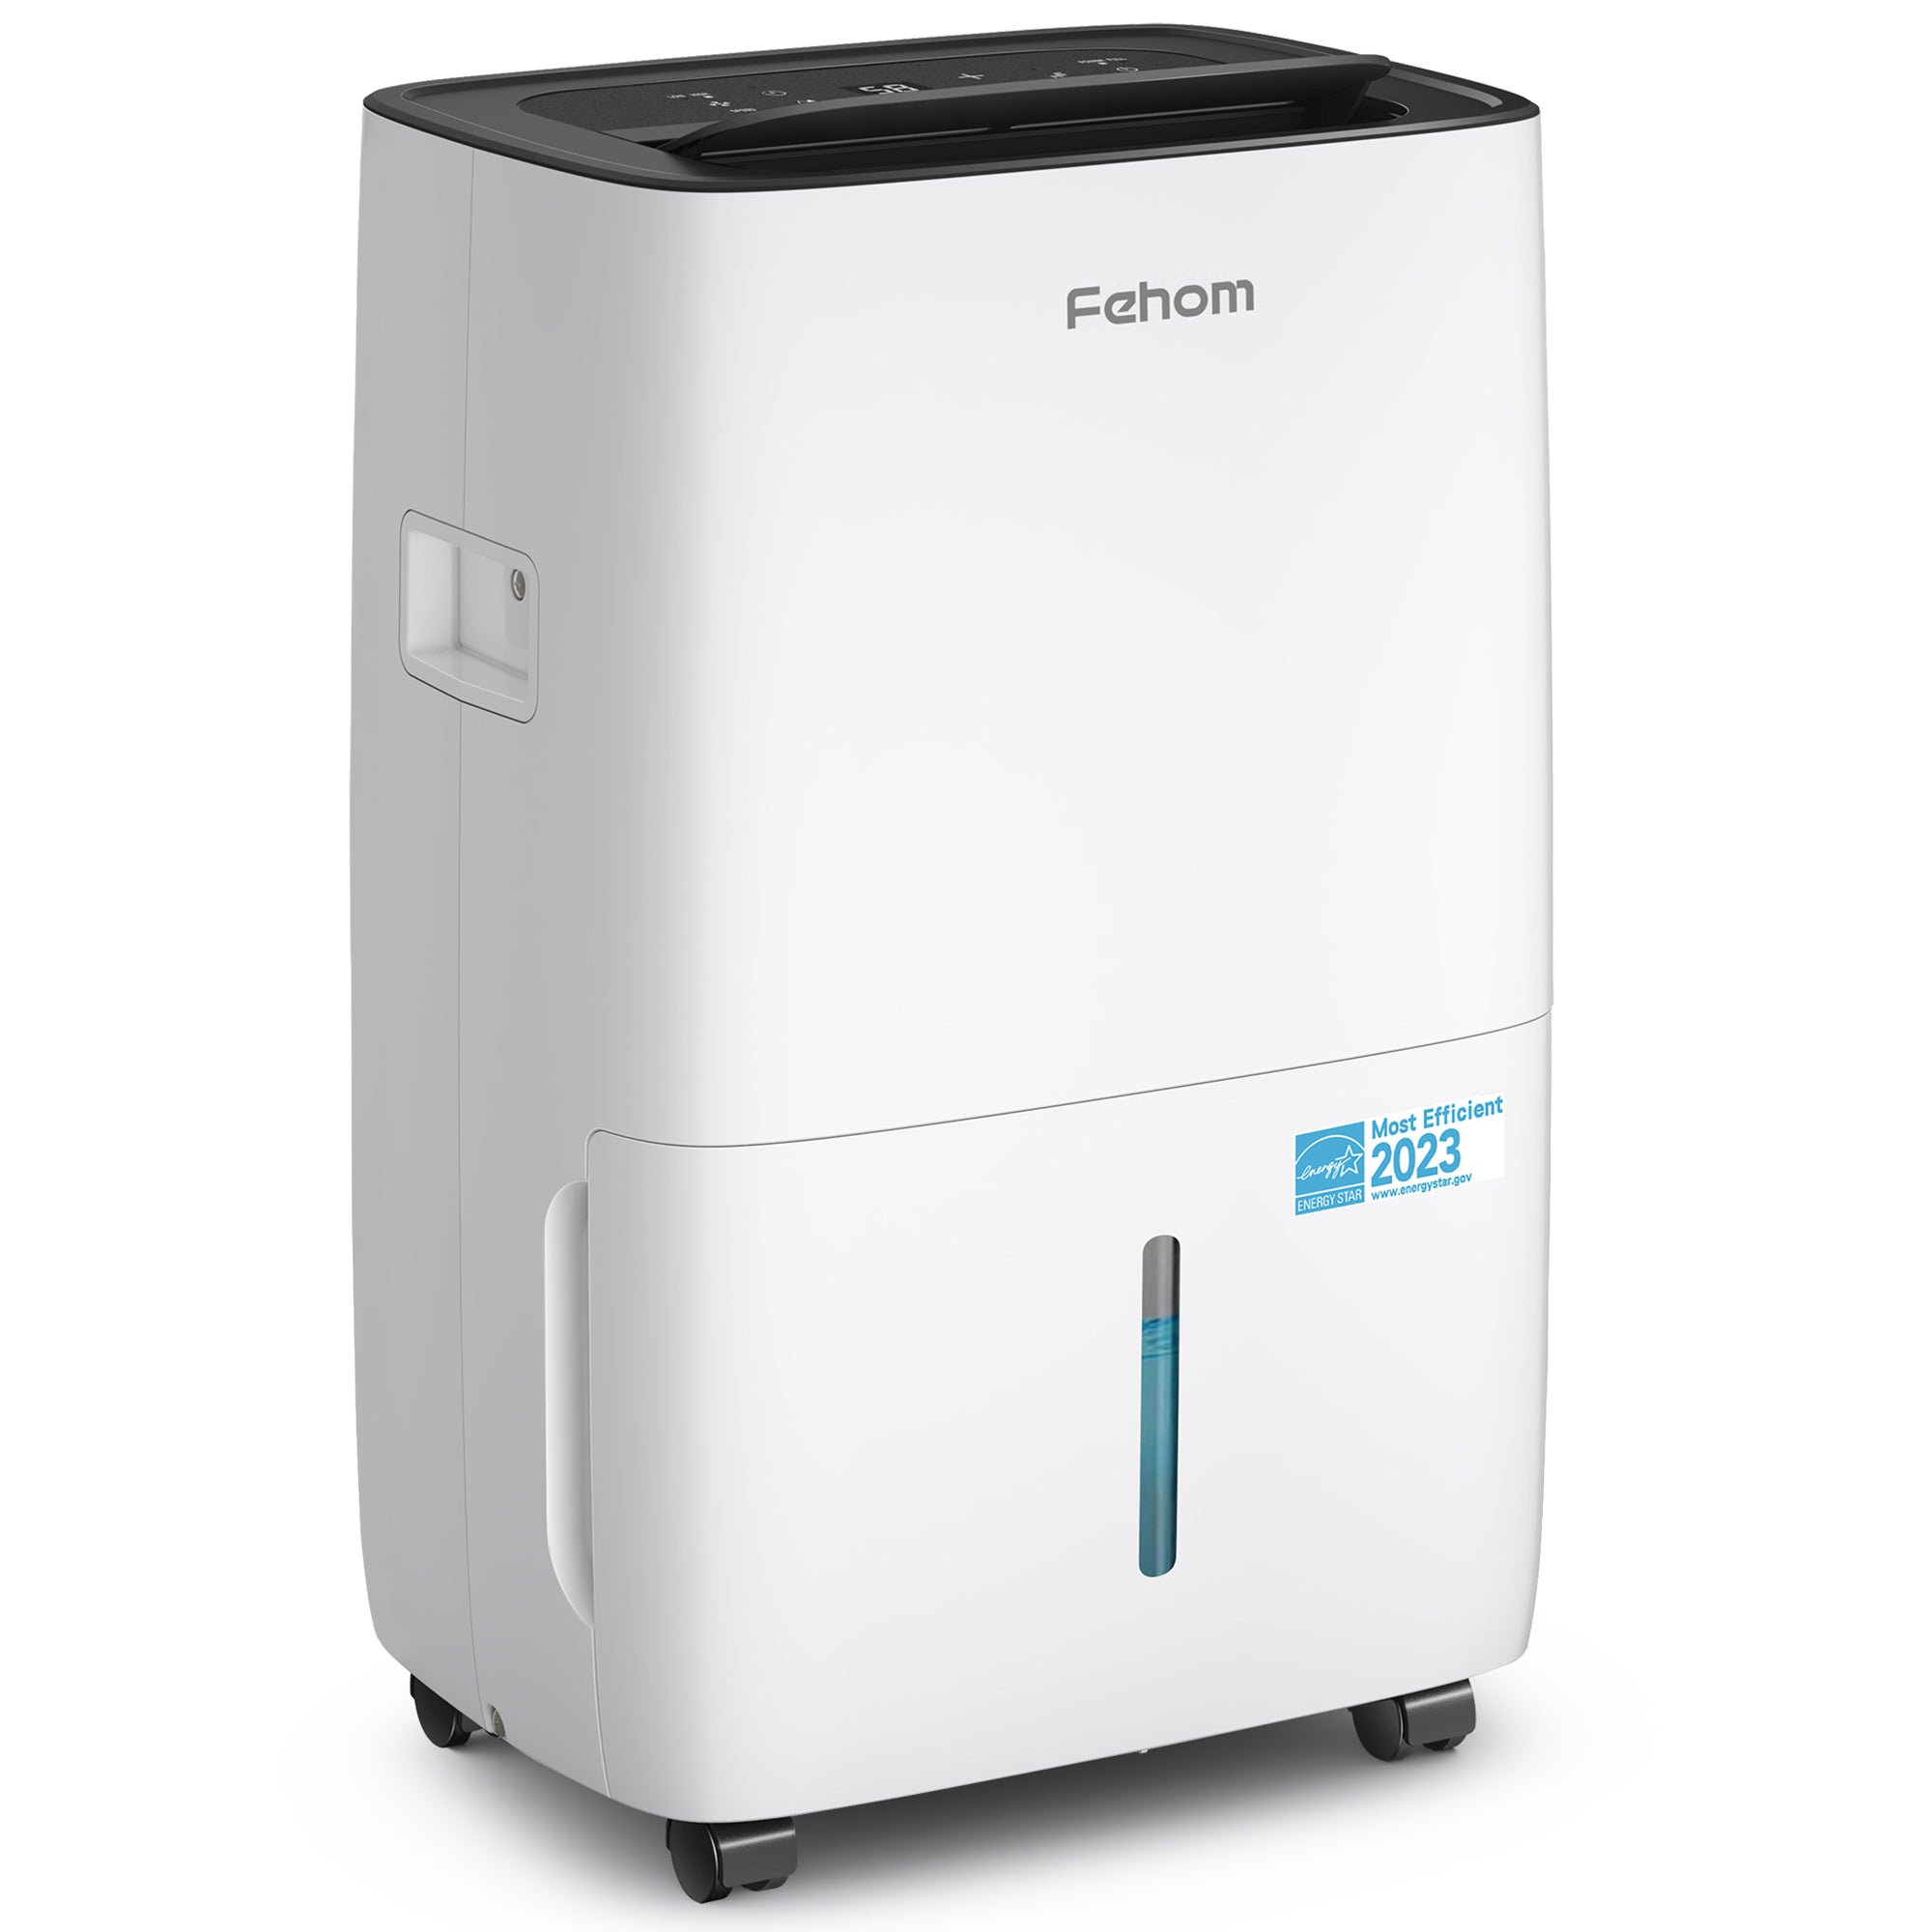 Fehom 120 Pints Dehumidifier Most Efficient 2023 Energy Star - 6000 Sq. Ft Dehumidifier for Basement with Drain Hose and 1.06 Gal Water Tank, Smart Dehumidifiers for Home, Large Rooms(Model: JD025L-120)